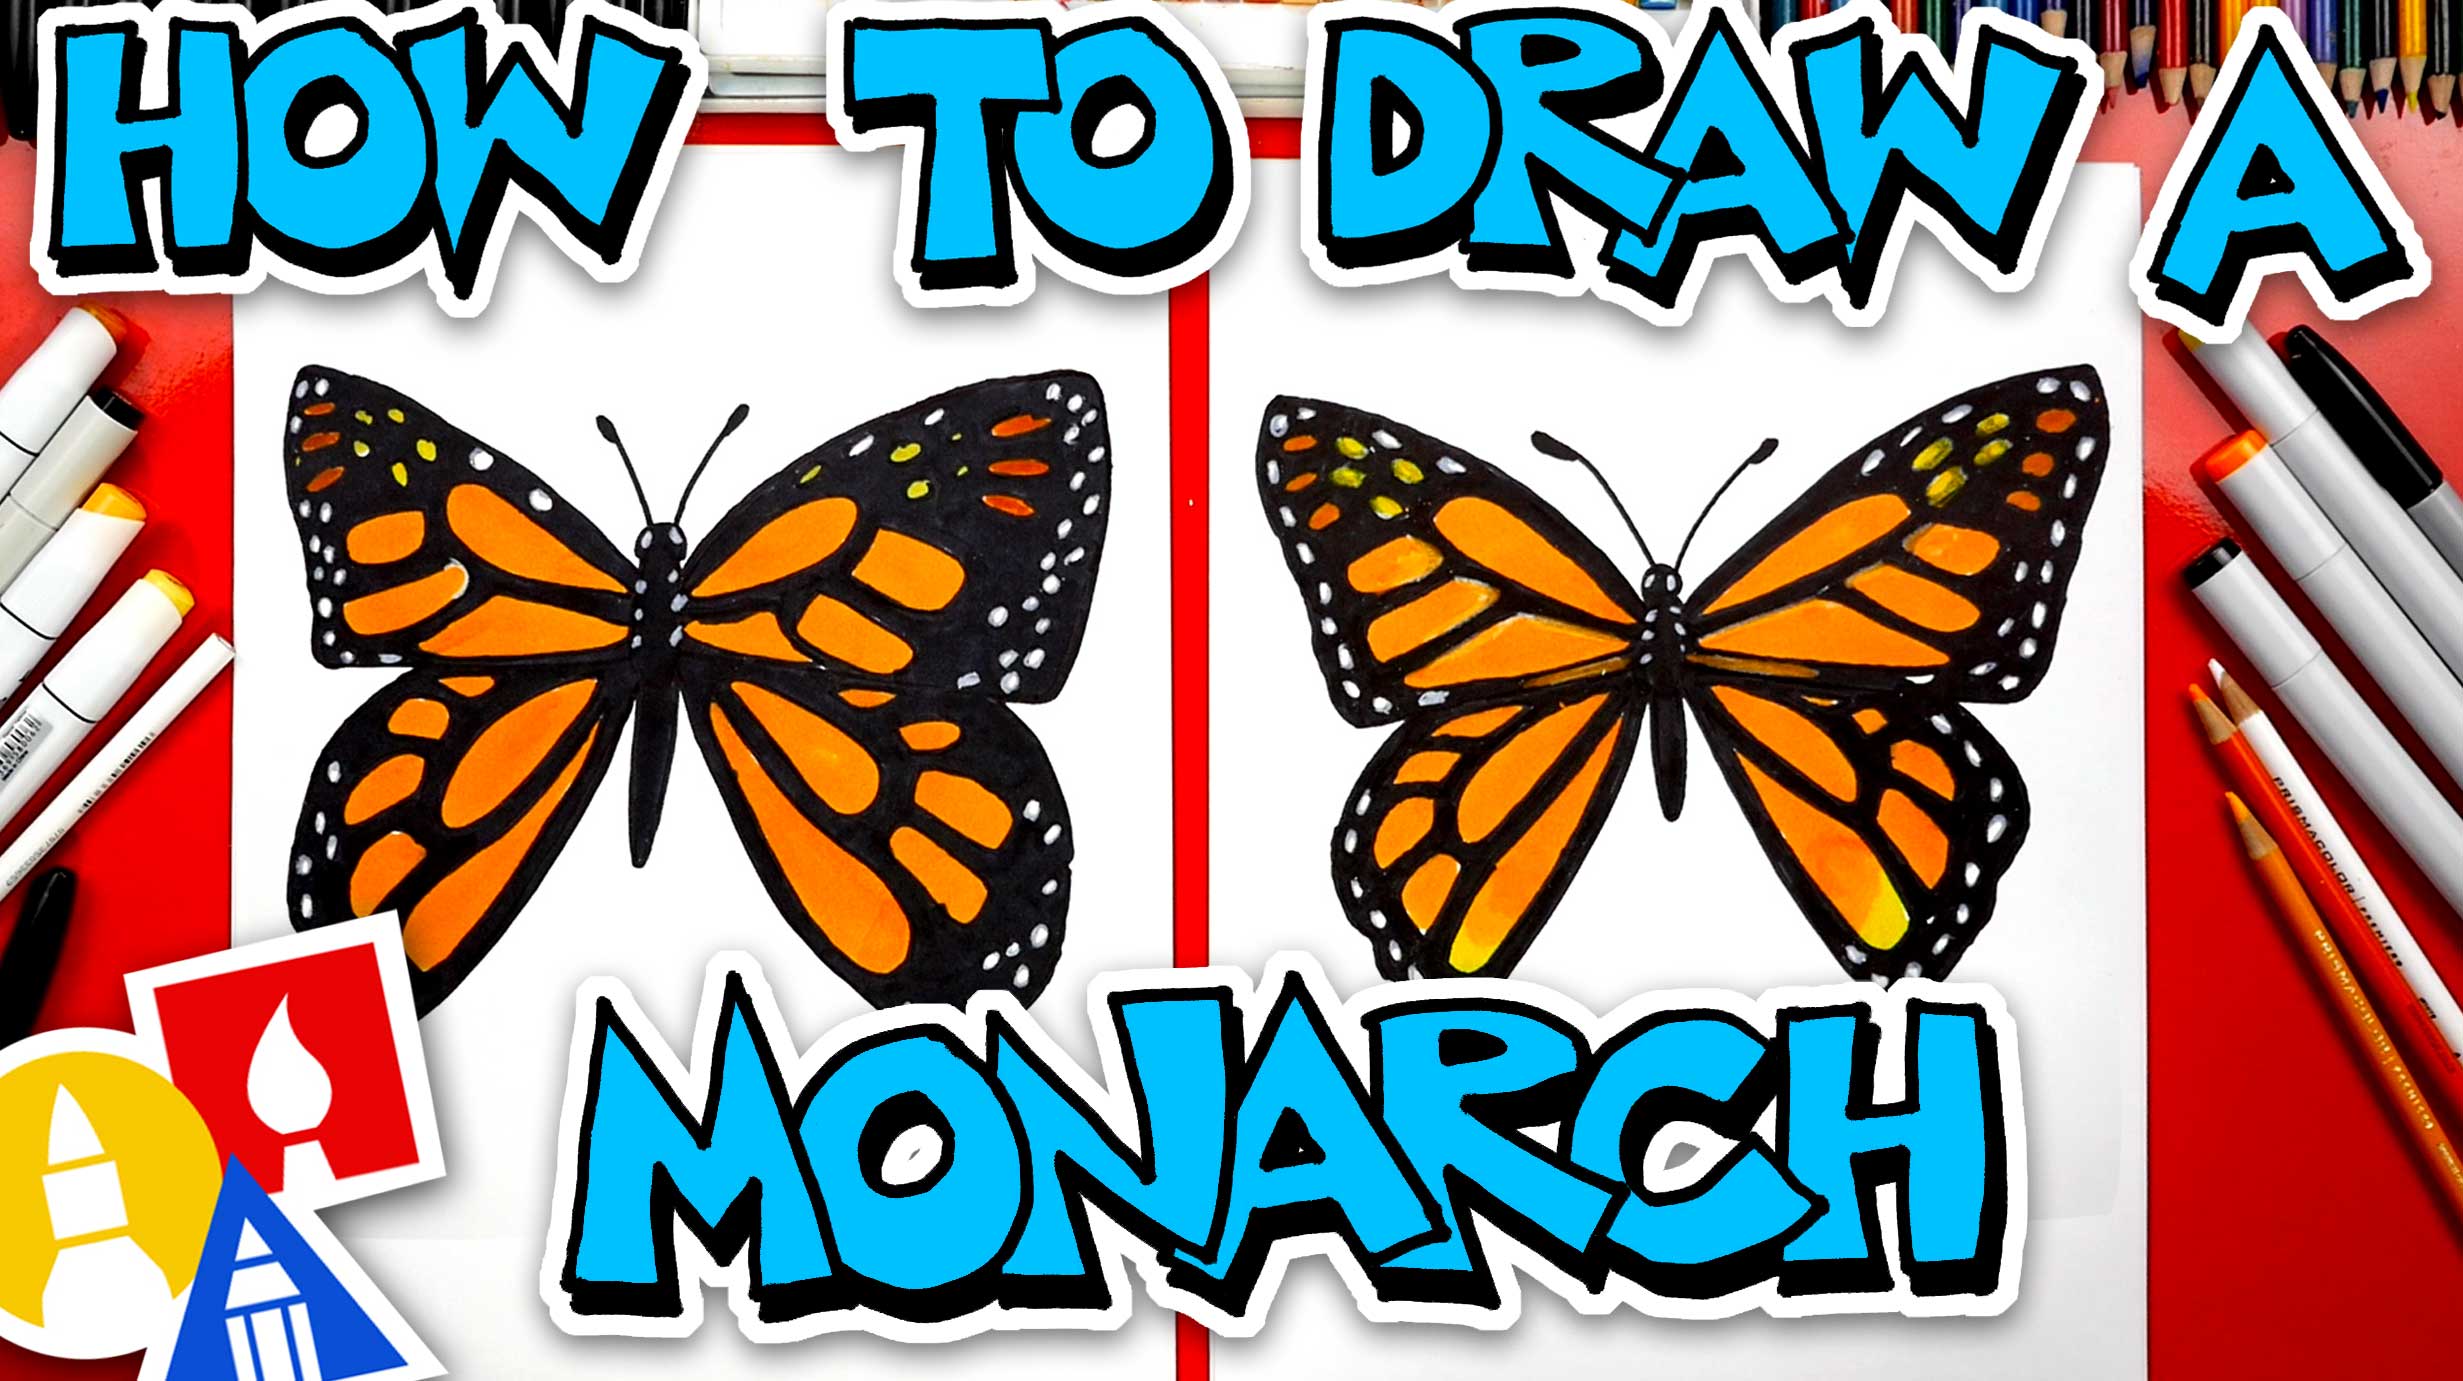 How To Draw A Monarch Butterfly - Art For Kids Hub